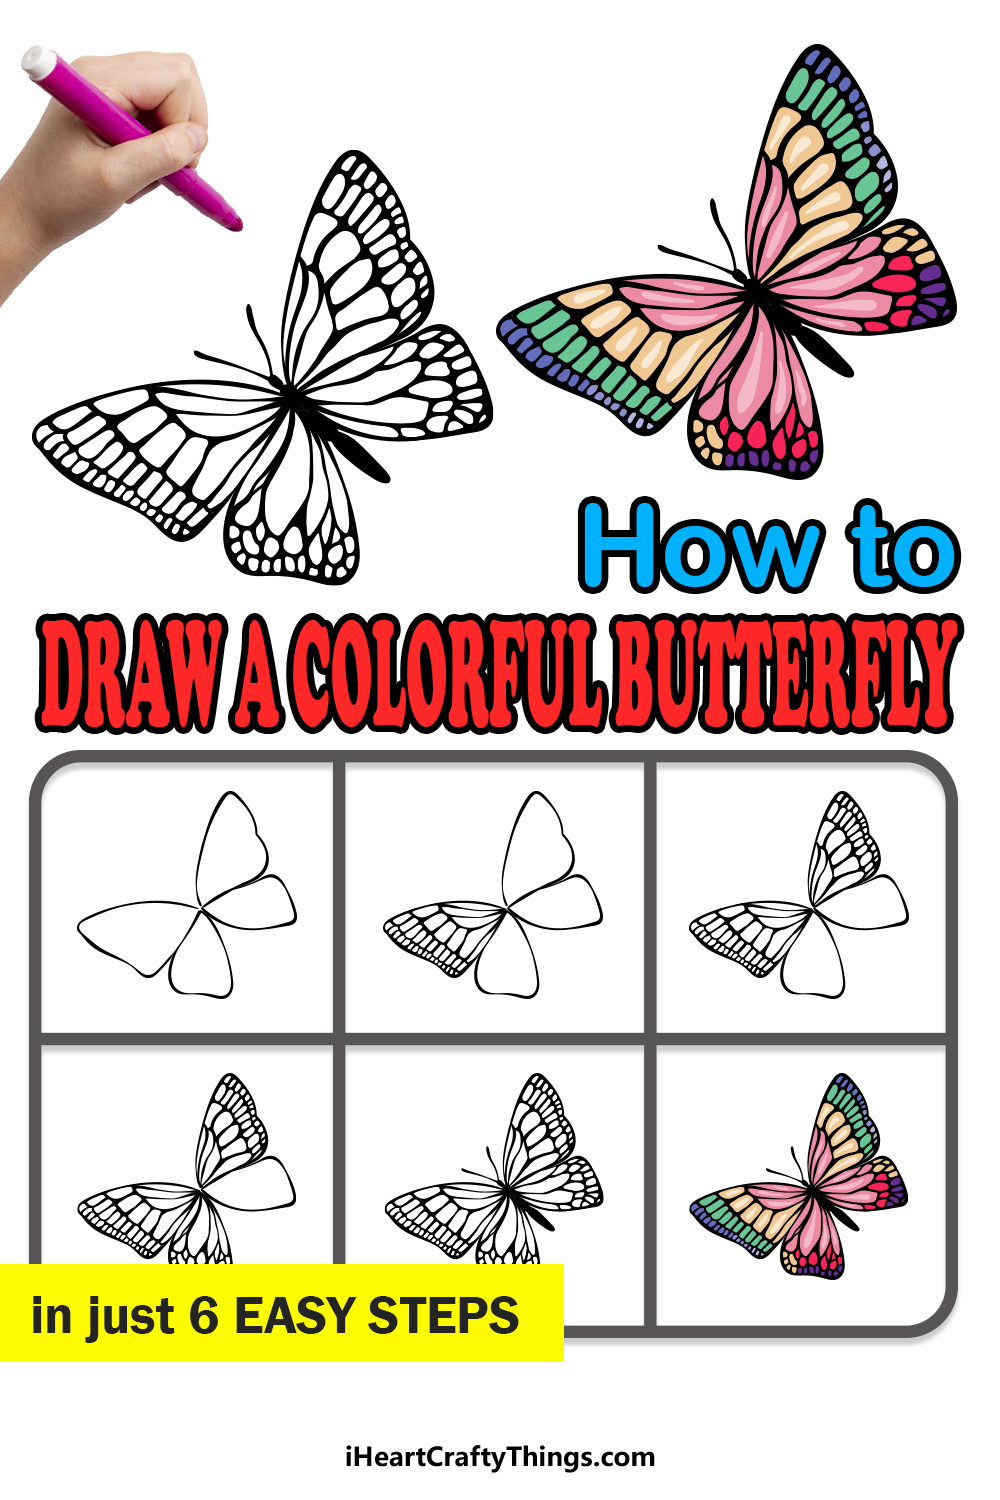 how to draw a Colorful Butterfly in 6 easy steps